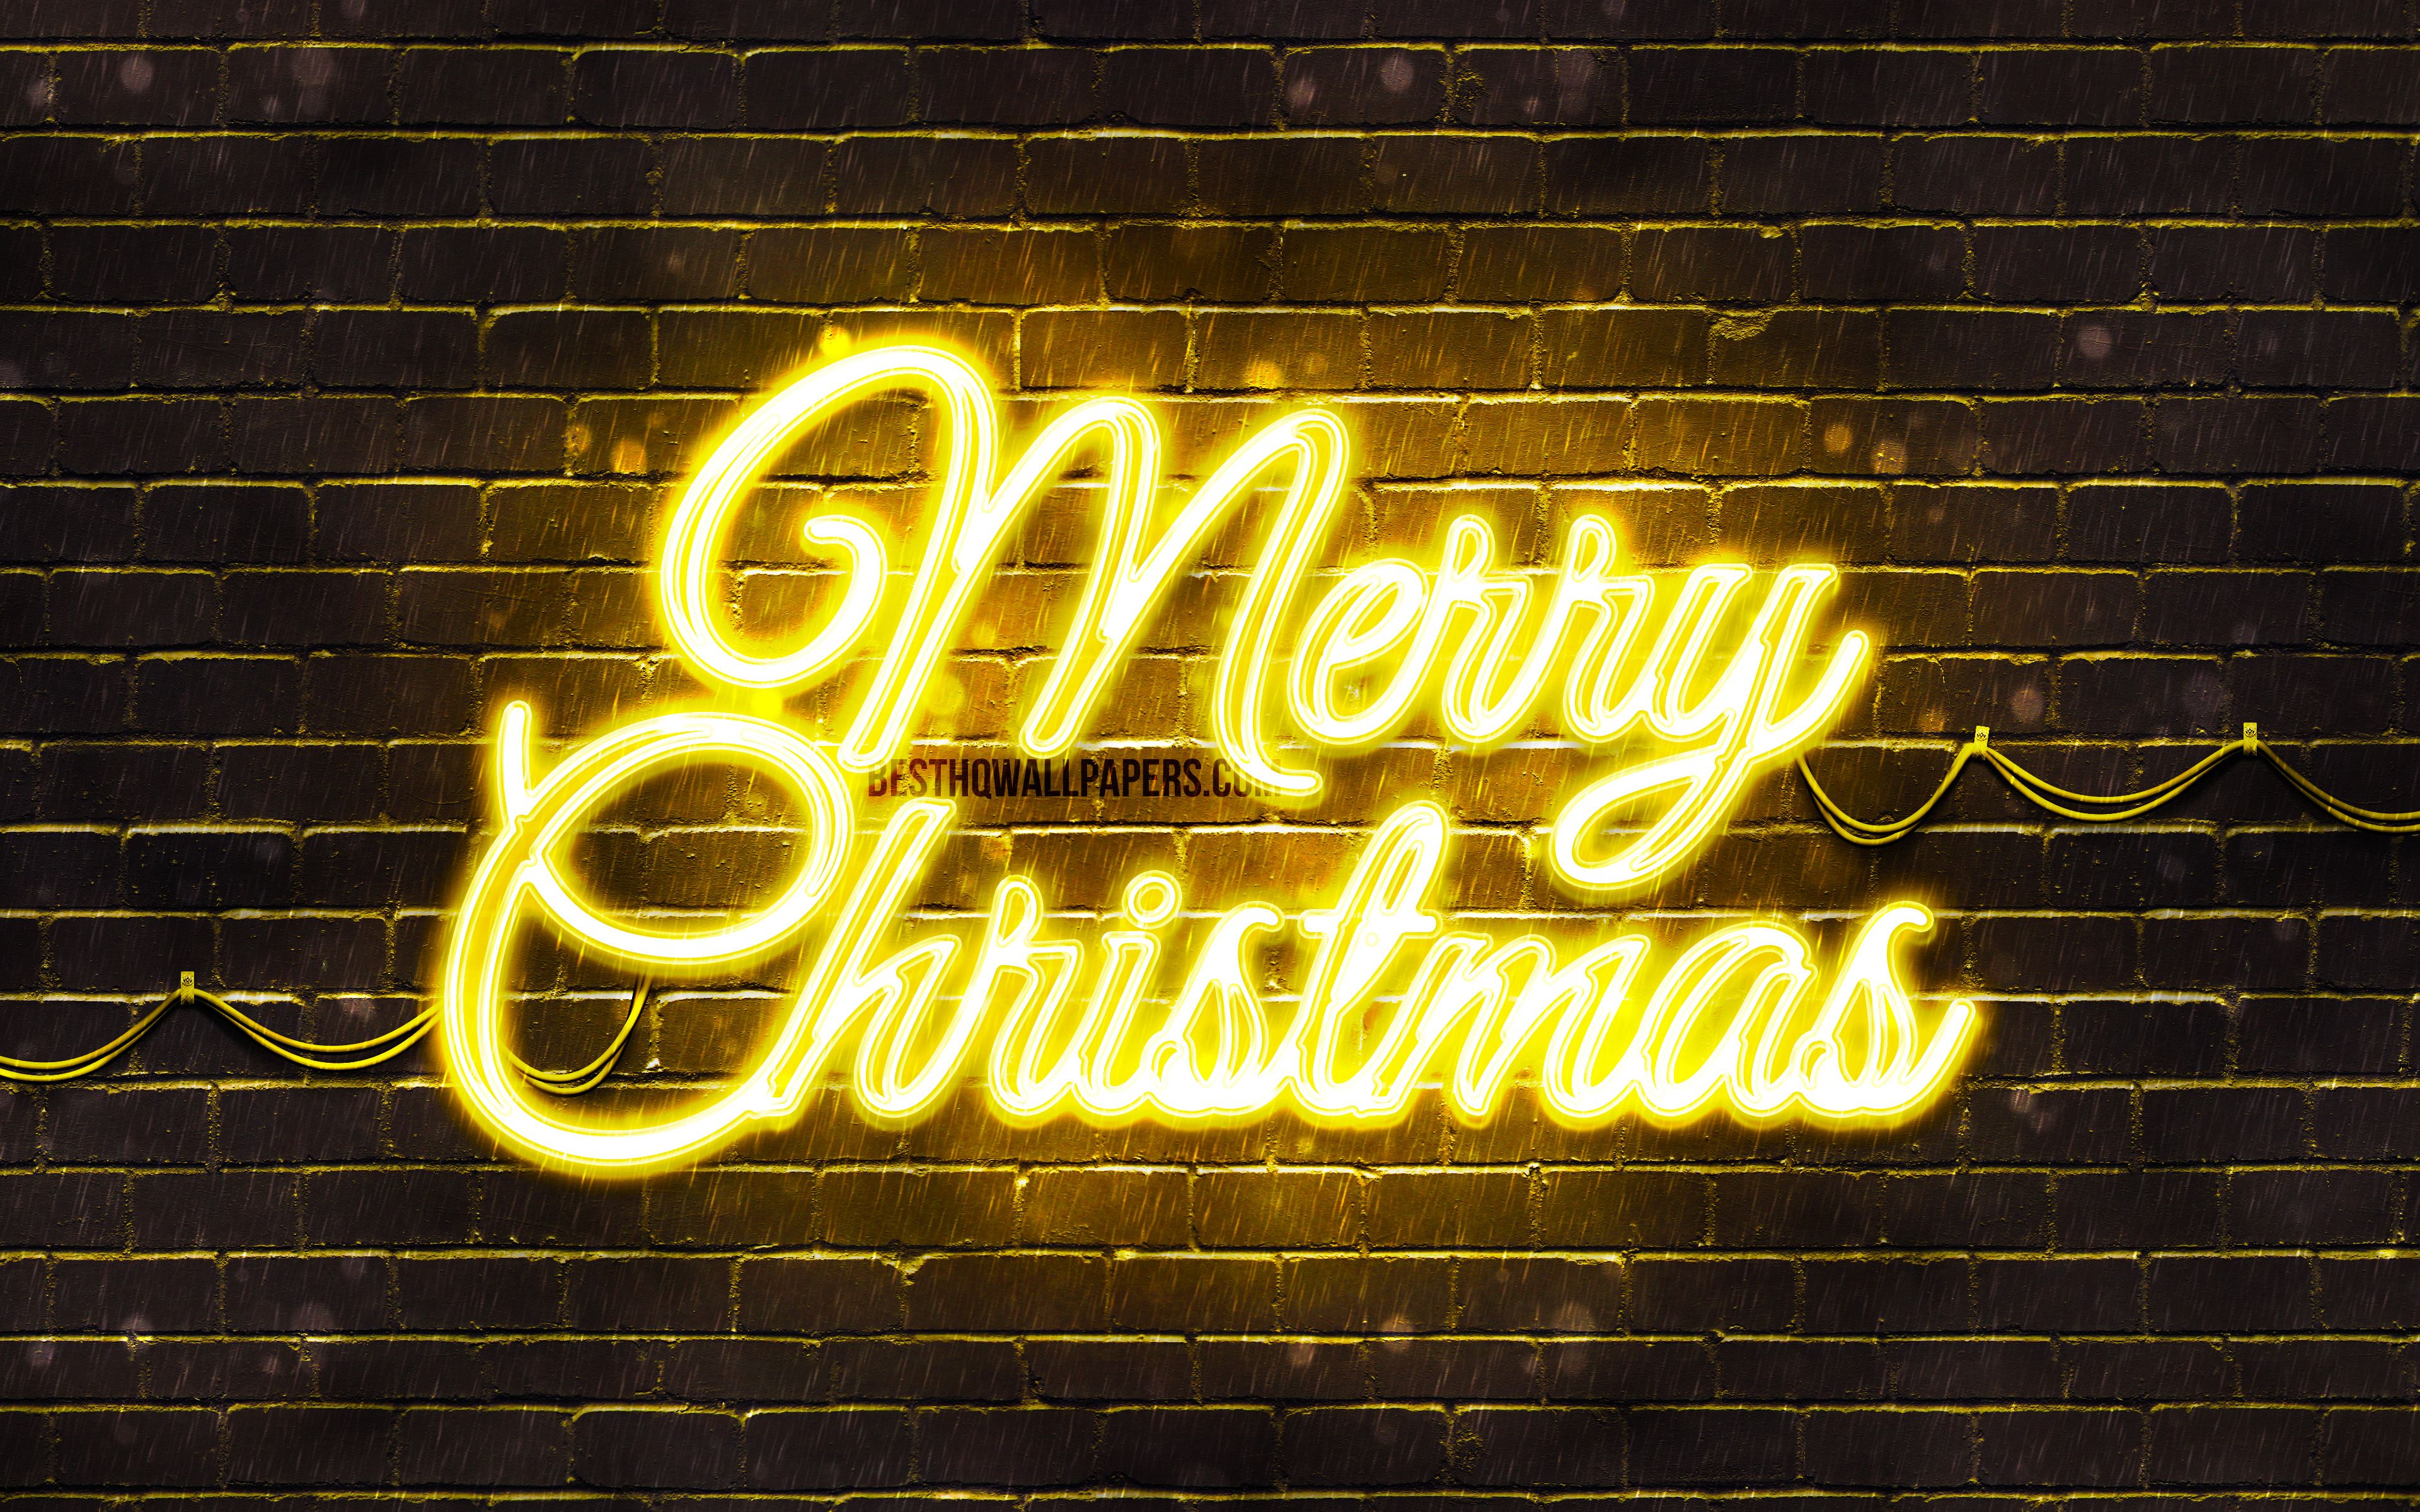 Download wallpaper Yellow neon Merry Christmas, 4k, yellow brickwall, Happy New Years Concept, Yellow Merry Christmas, creative, Christmas decorations, Merry Christmas, xmas decorations for desktop with resolution 3840x2400. High Quality HD picture